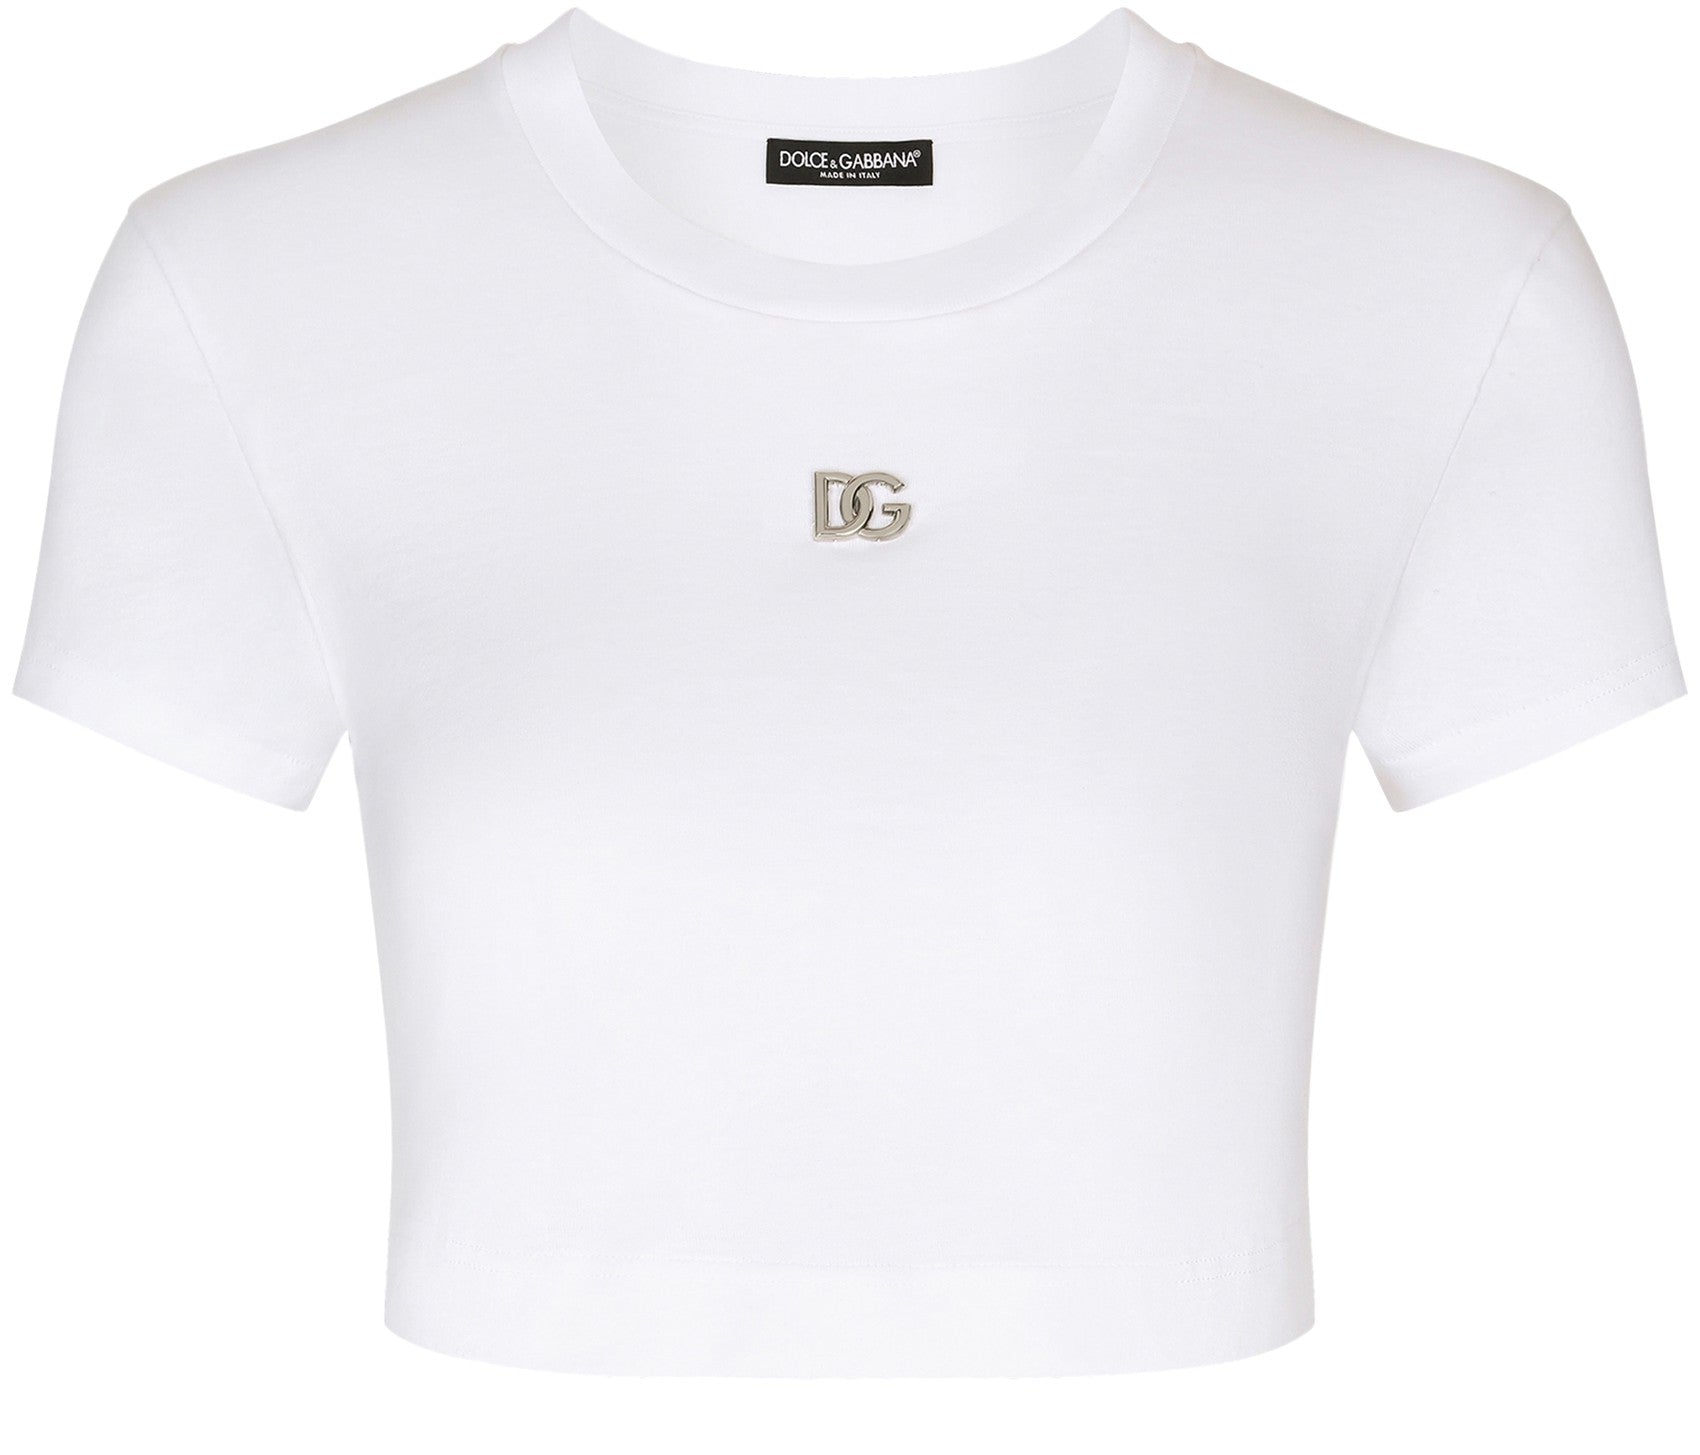 Tops CHANEL Pre-Owned para mujer - FARFETCH